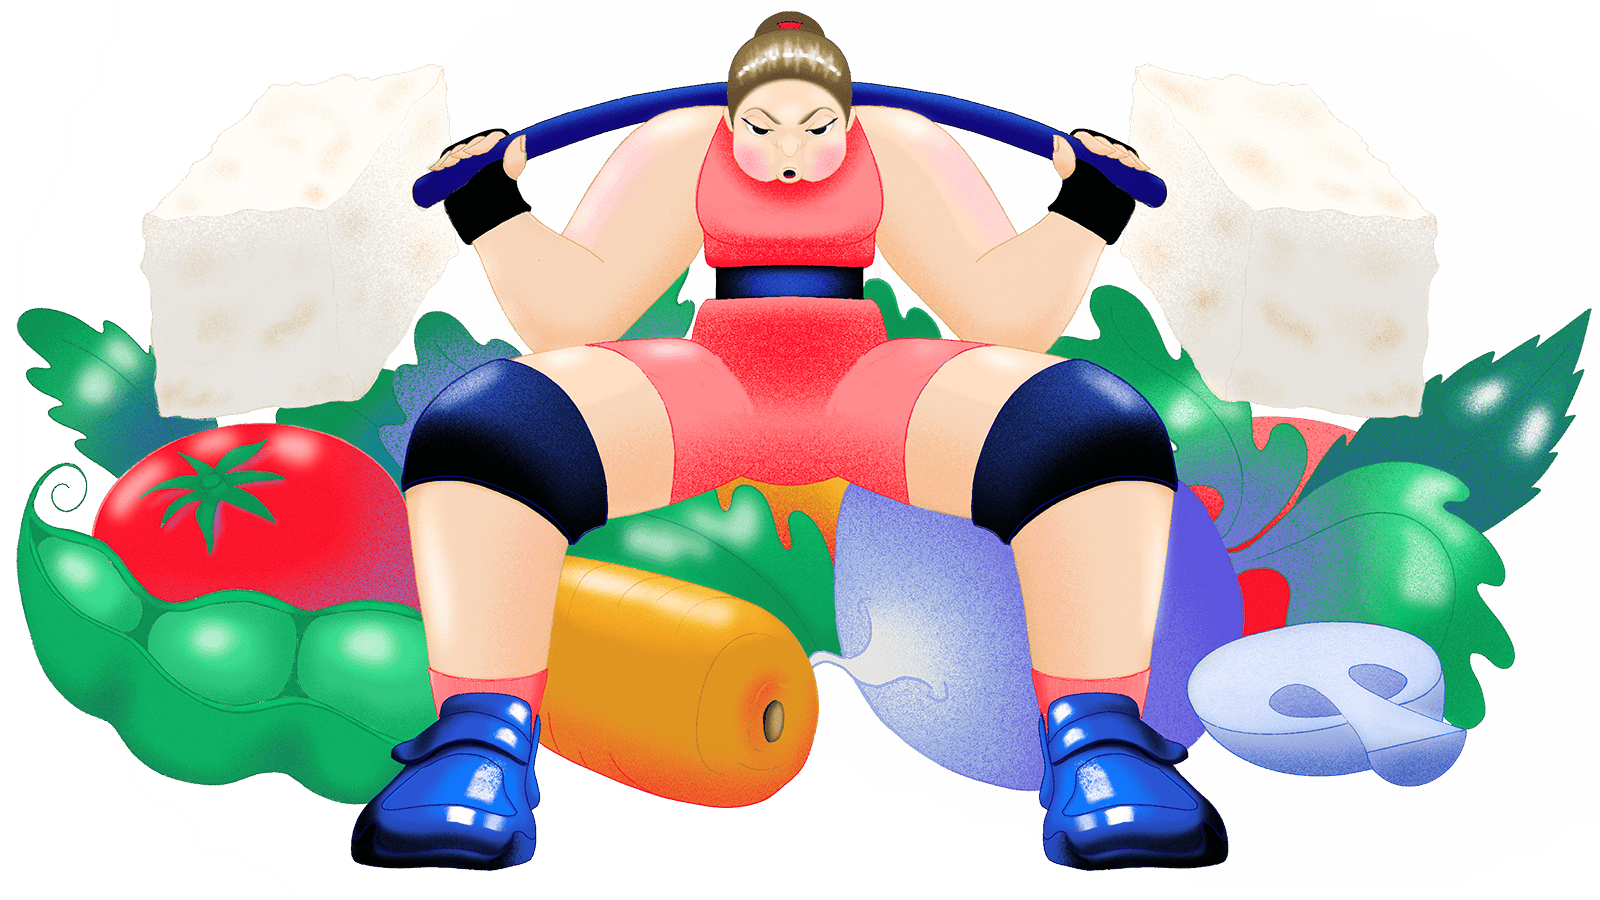 Illustration of a woman lifting heavy weights surrounded by veggies